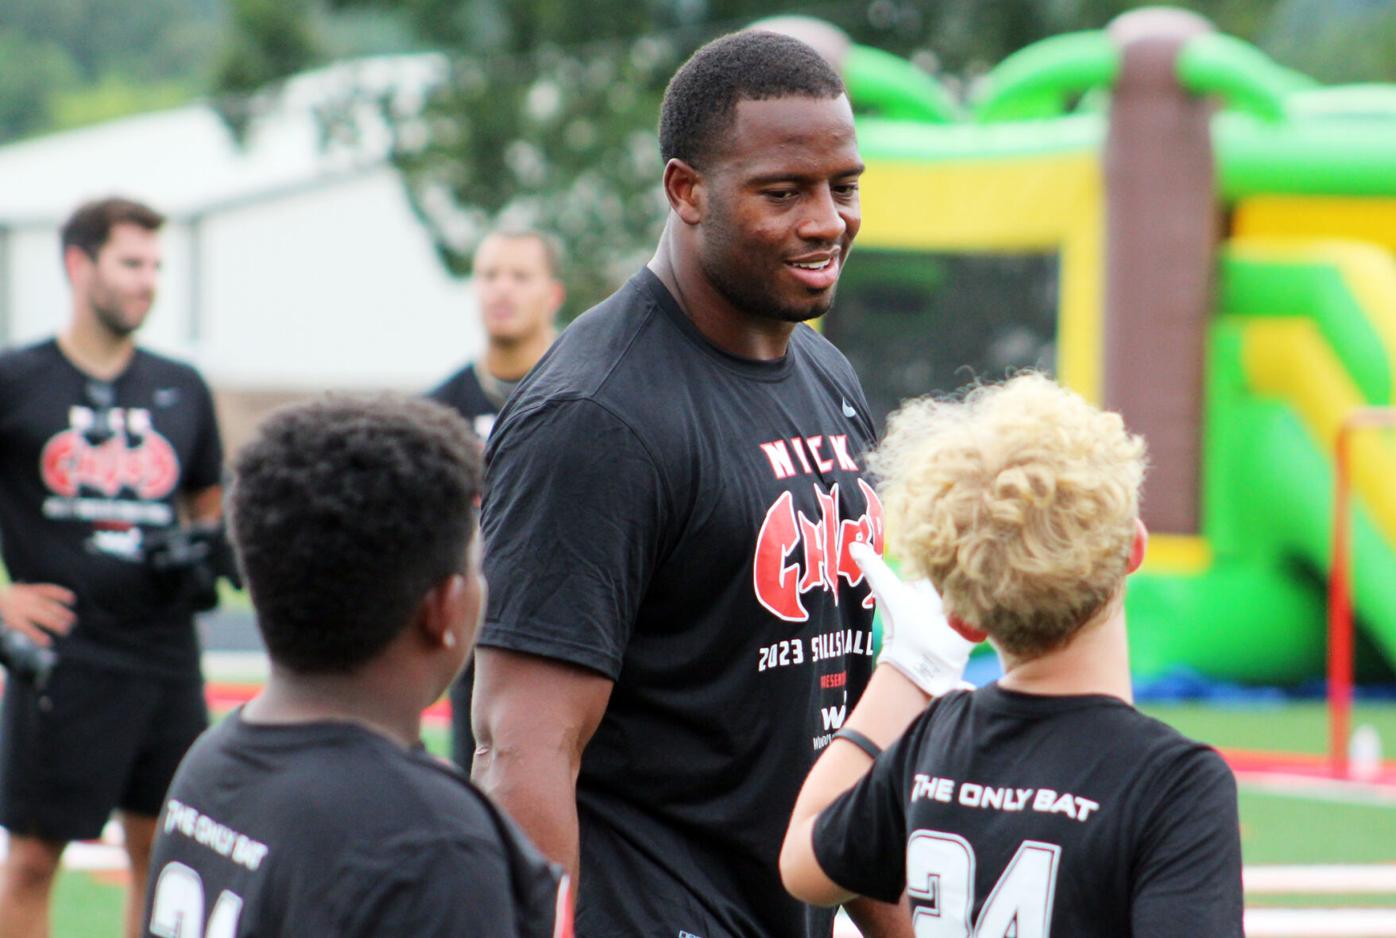 NFL running back Nick Chubb returns with youth football camp at Cedartown  High School, Local